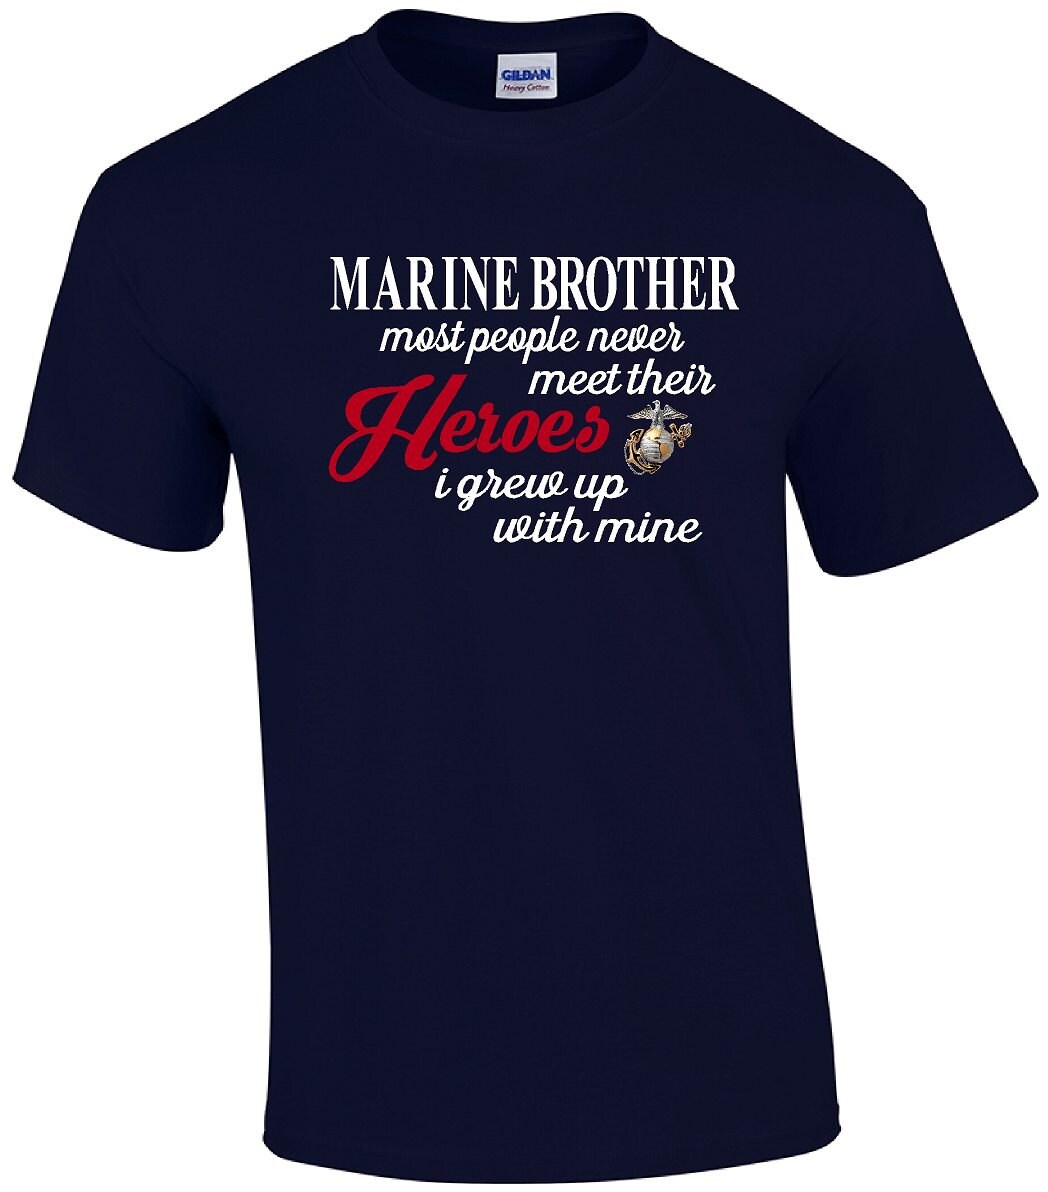 Marine Brother T-Shirt Military Brother Tee by OurTshirtShack